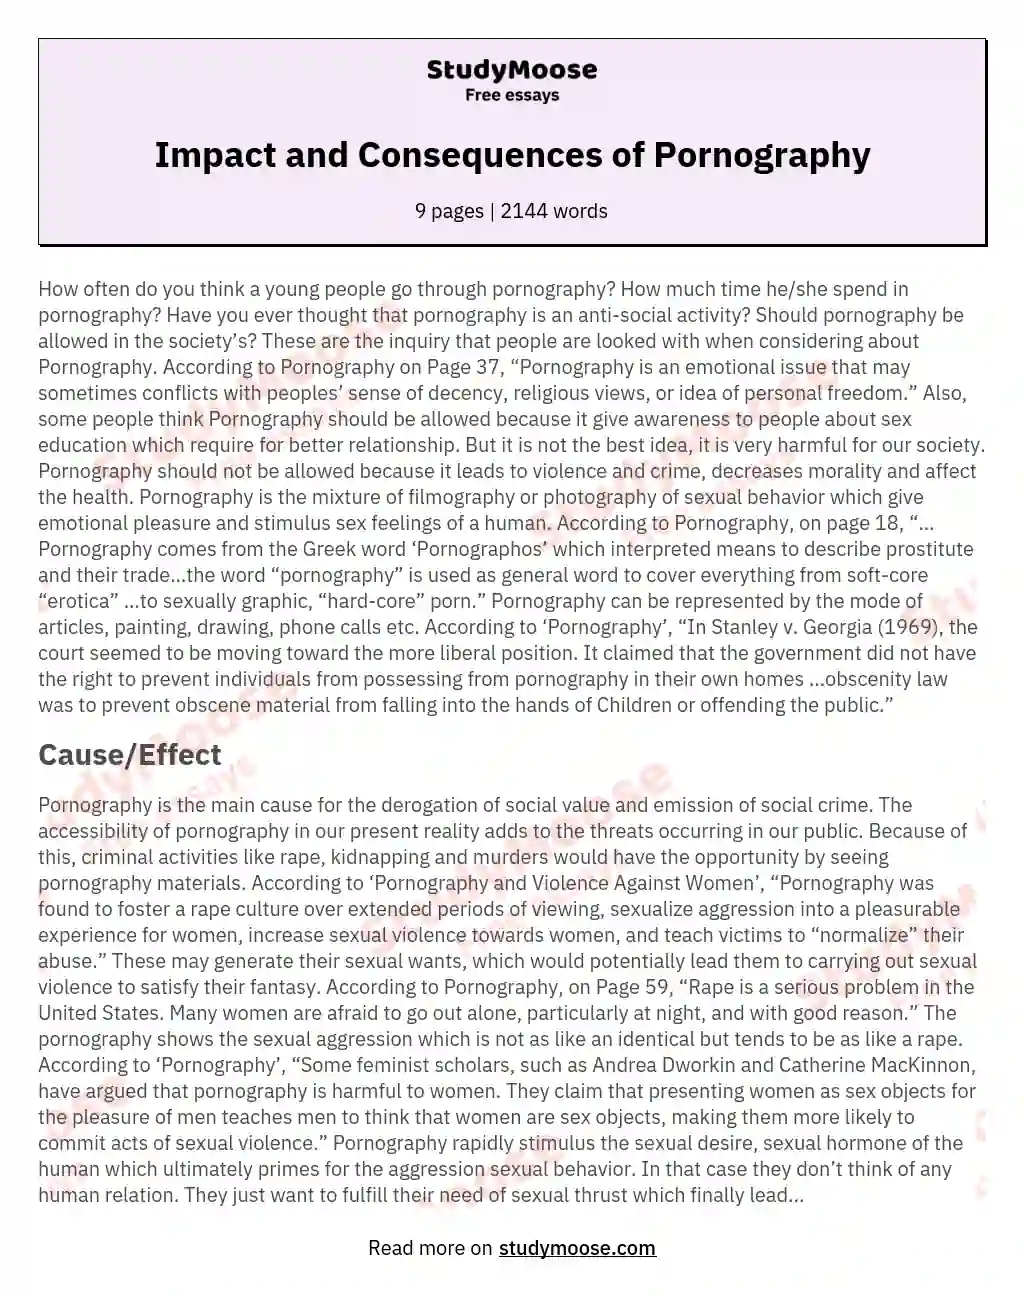 Impact and Consequences of Pornography